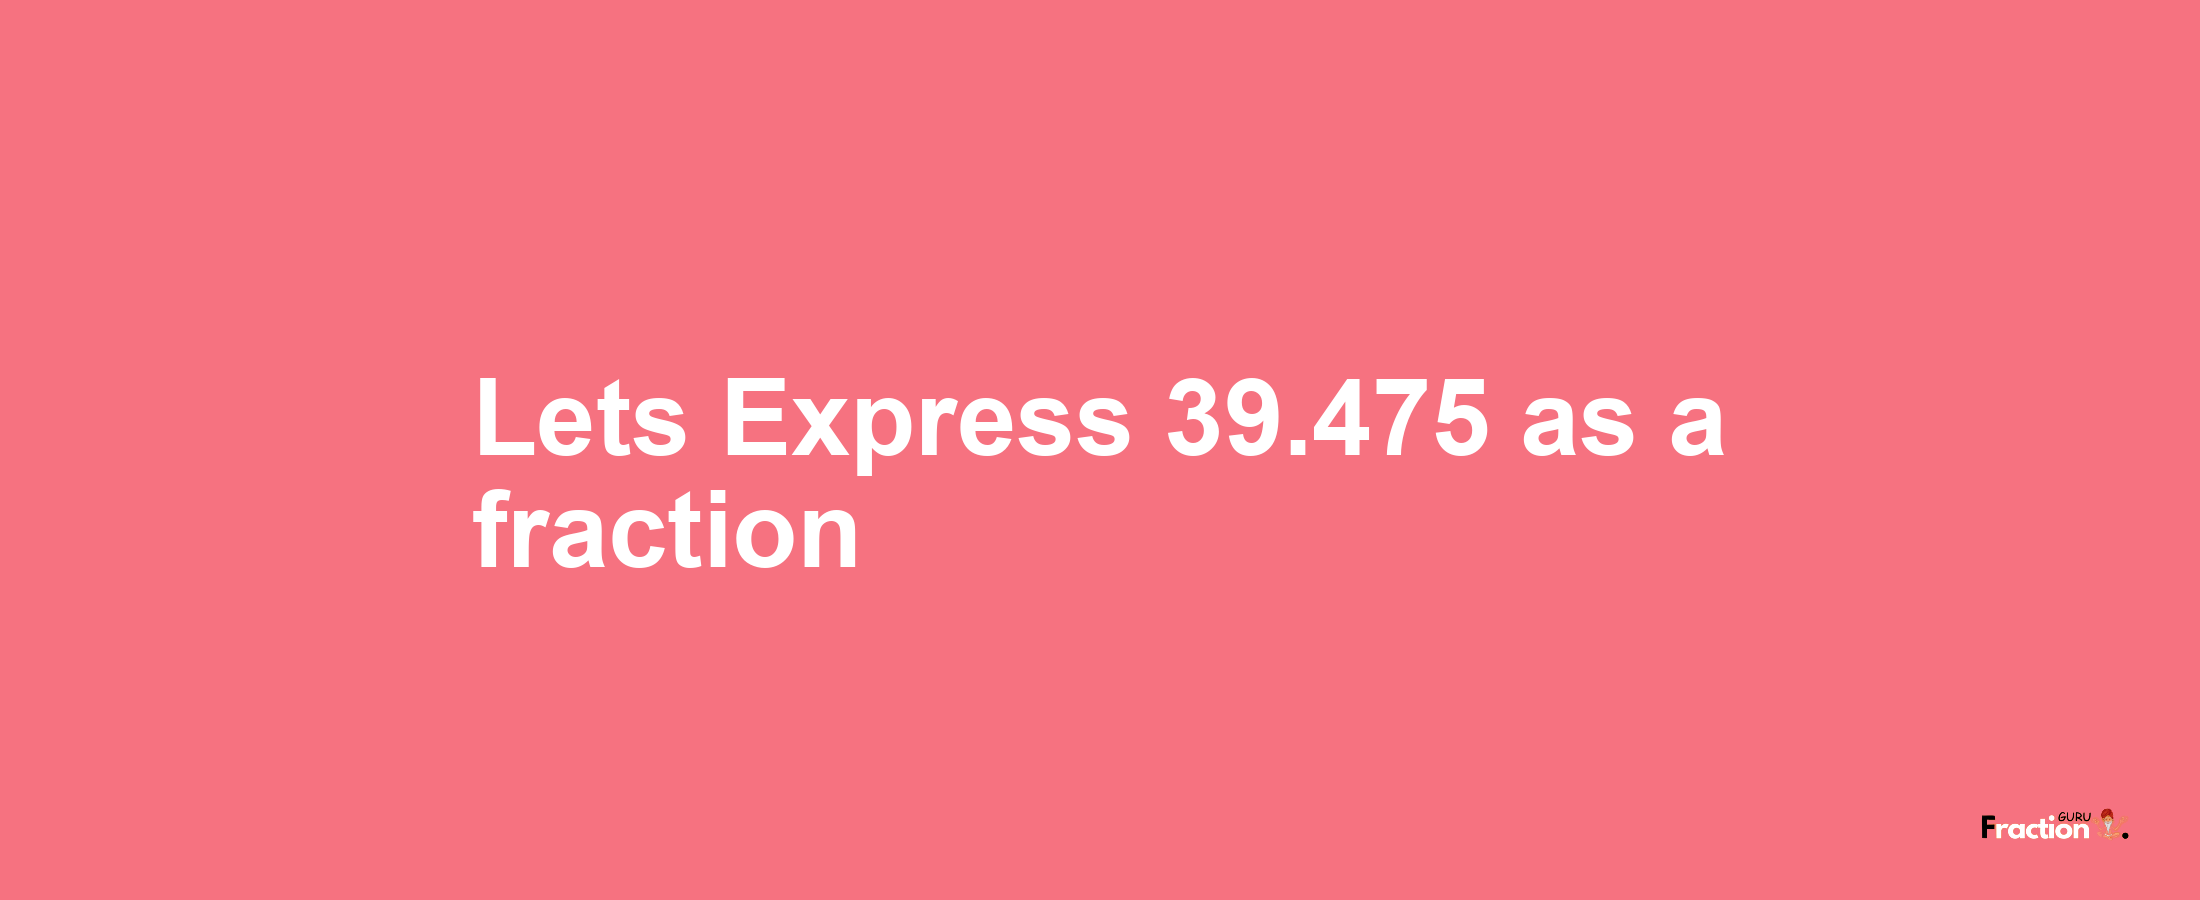 Lets Express 39.475 as afraction